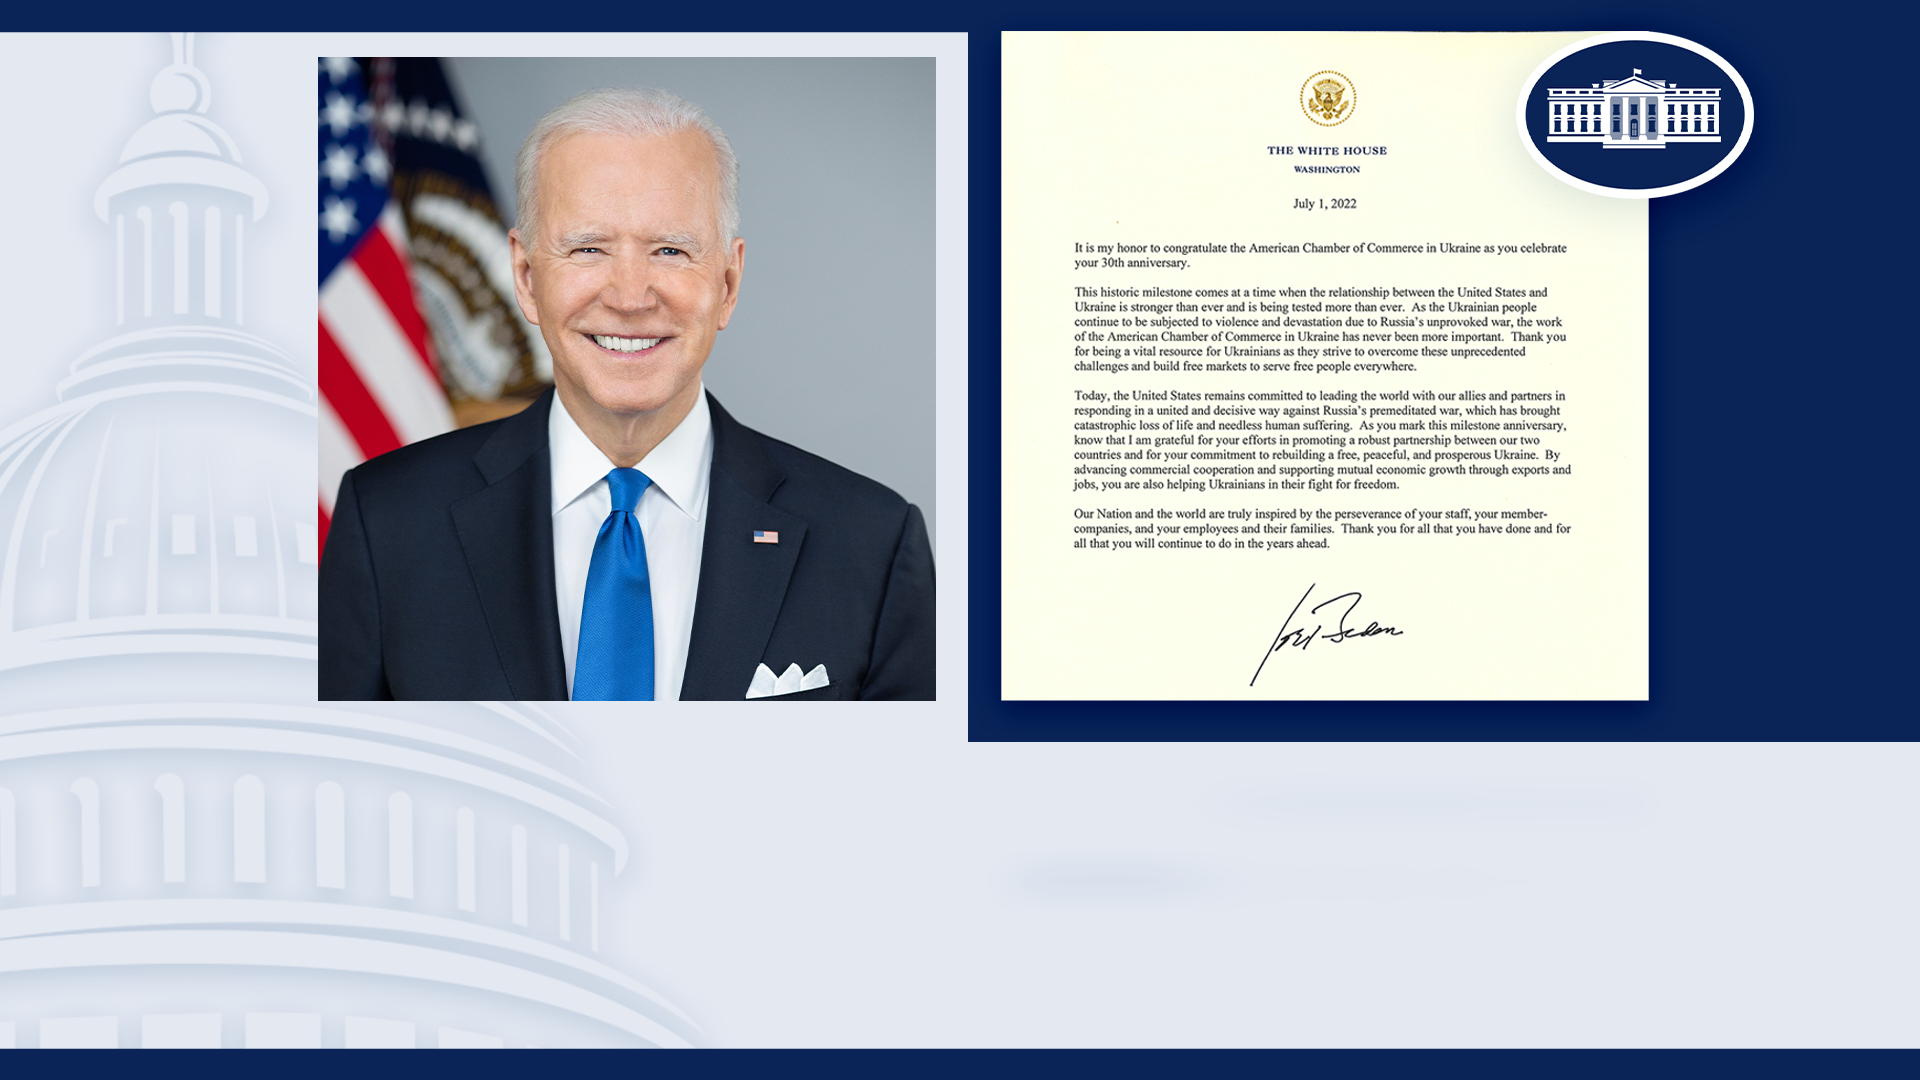 The work of the American Chamber of Commerce in Ukraine has never been more important – US President Joe Biden congratulates AmCham Ukraine on its 30th anniversary